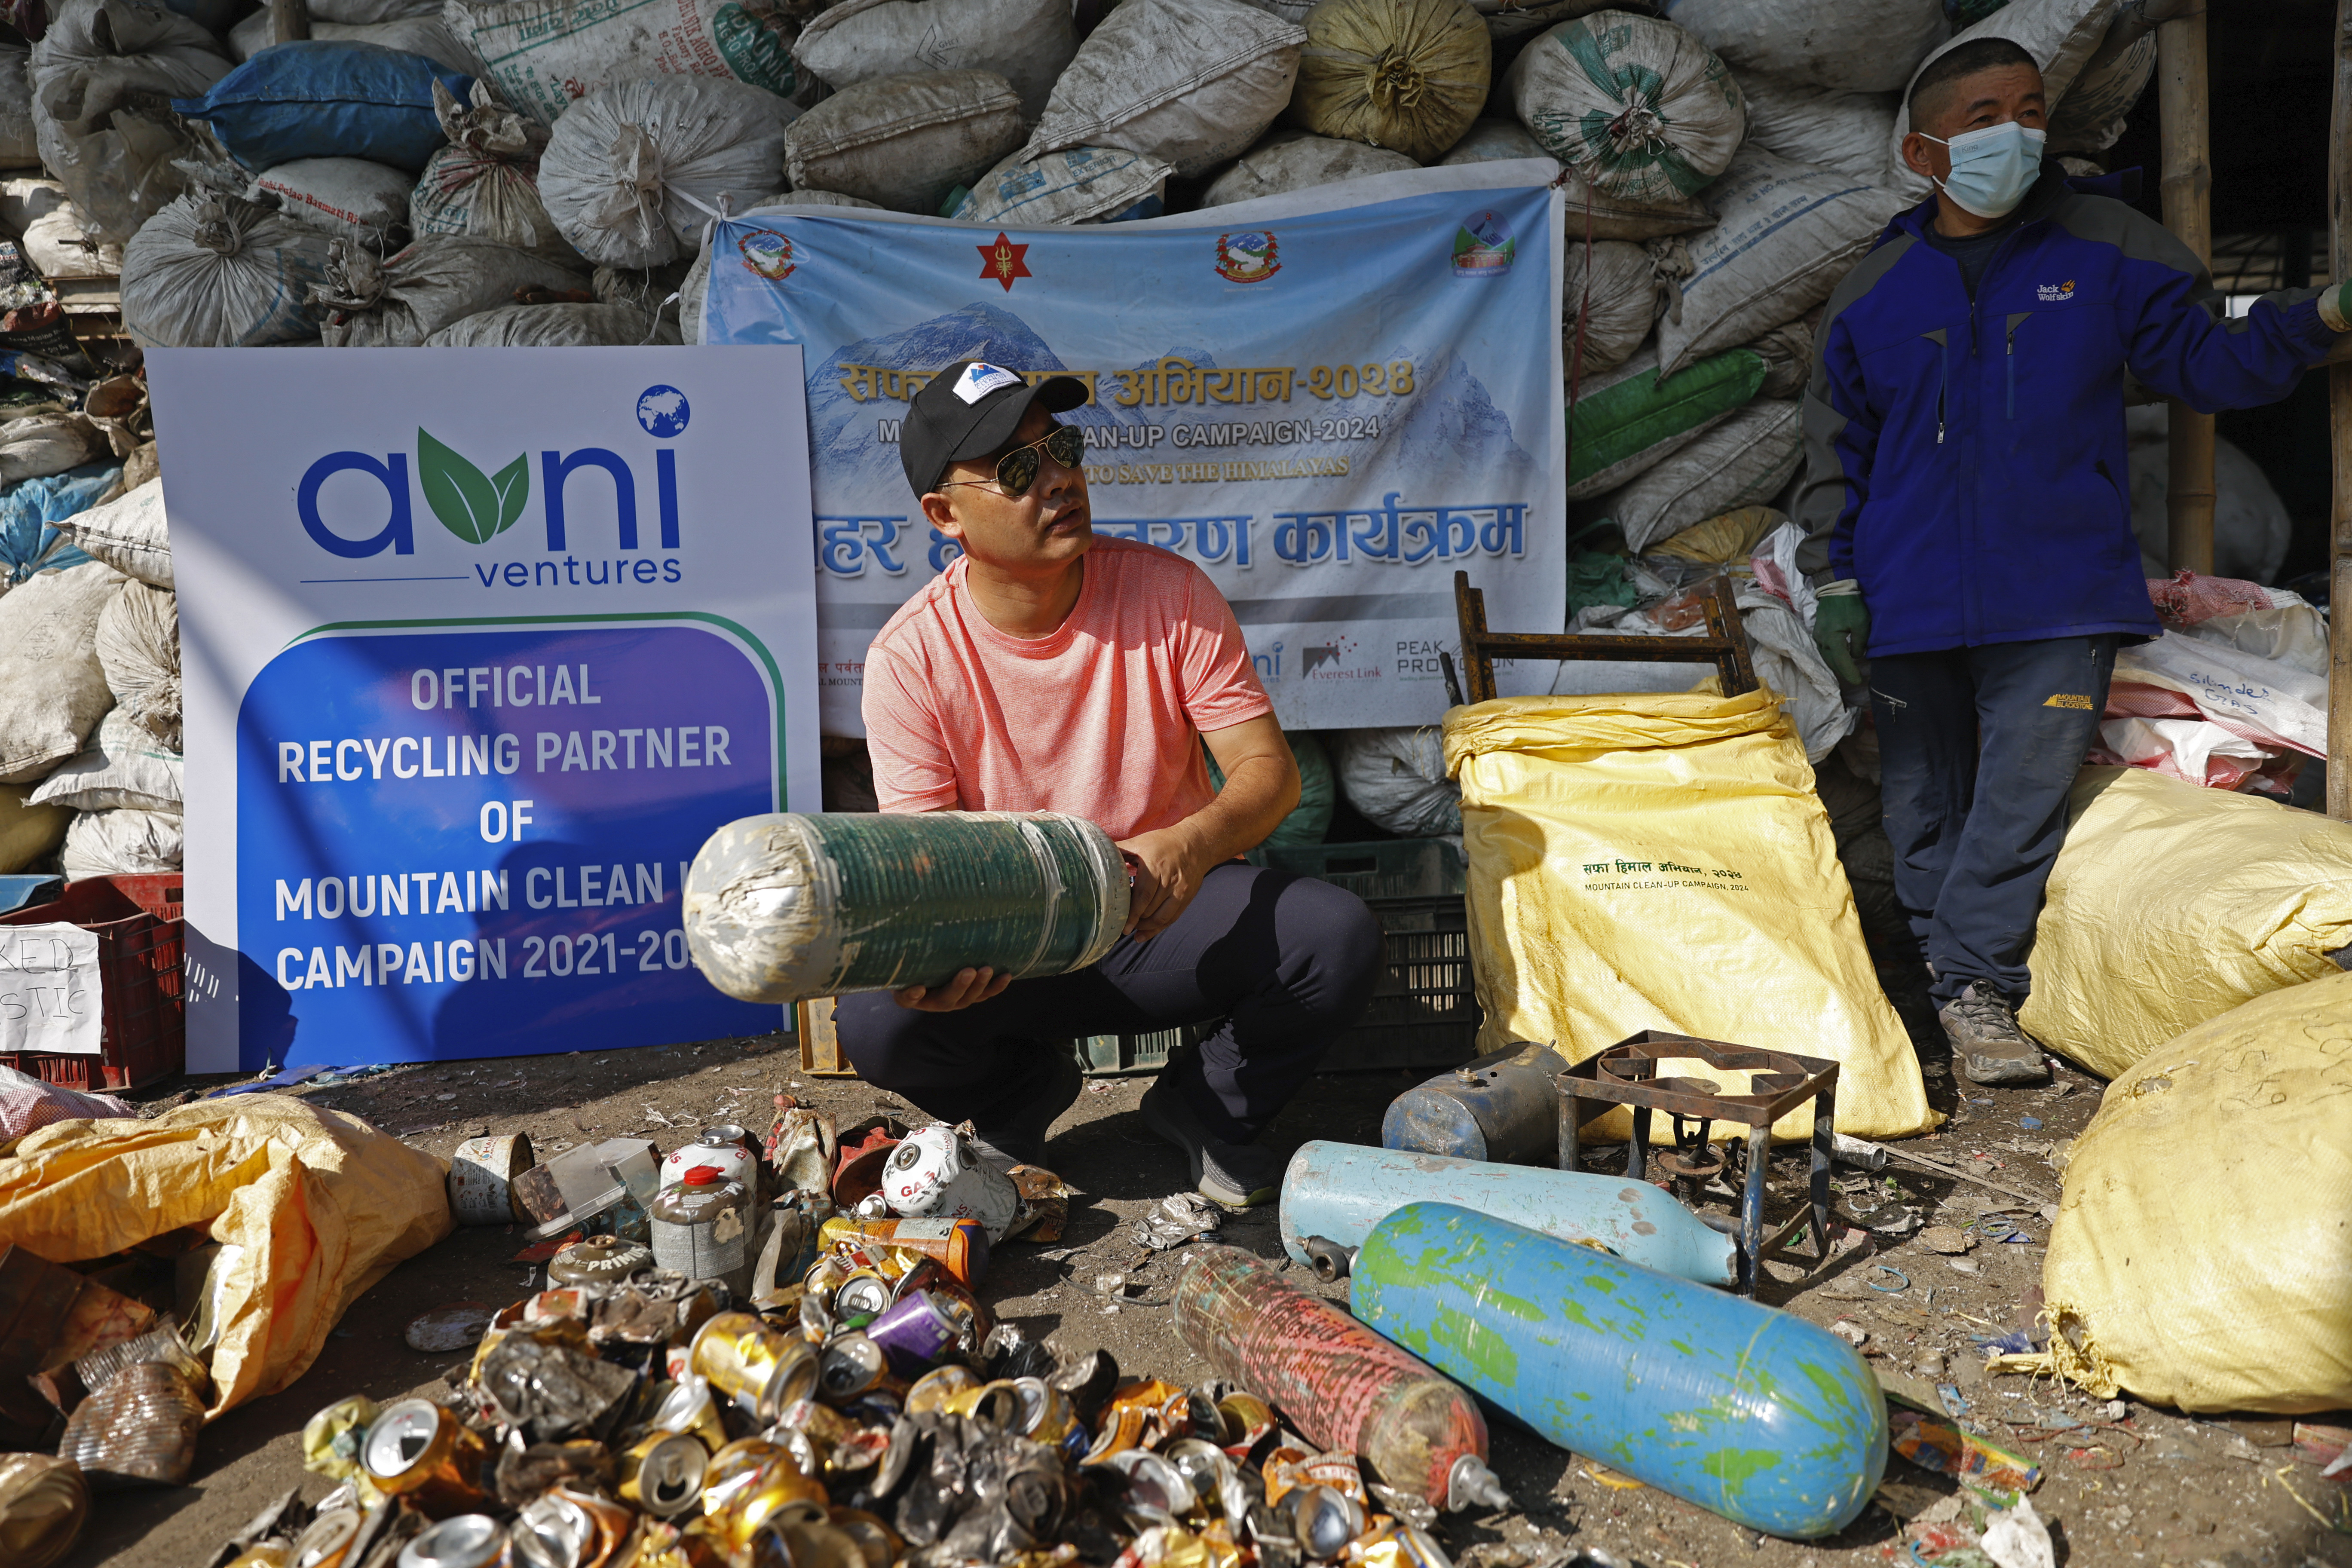 Sushil Khadga of the Agni Ventures, an agency that manages recyclable waste, checks an used oxygen cylinder collected en route Mount Everest before it is recycled at the facility, in Kathmandu, Nepal, Monday, June 24, 2024. The highest camp on the world's tallest mountain is littered with garbage that is going to take years to clean up, according to a Sherpa who led a team that worked to clear trash and dig up dead bodies frozen for years near Mount Everest's peak. (AP Photo/Sanjog Manandhar)